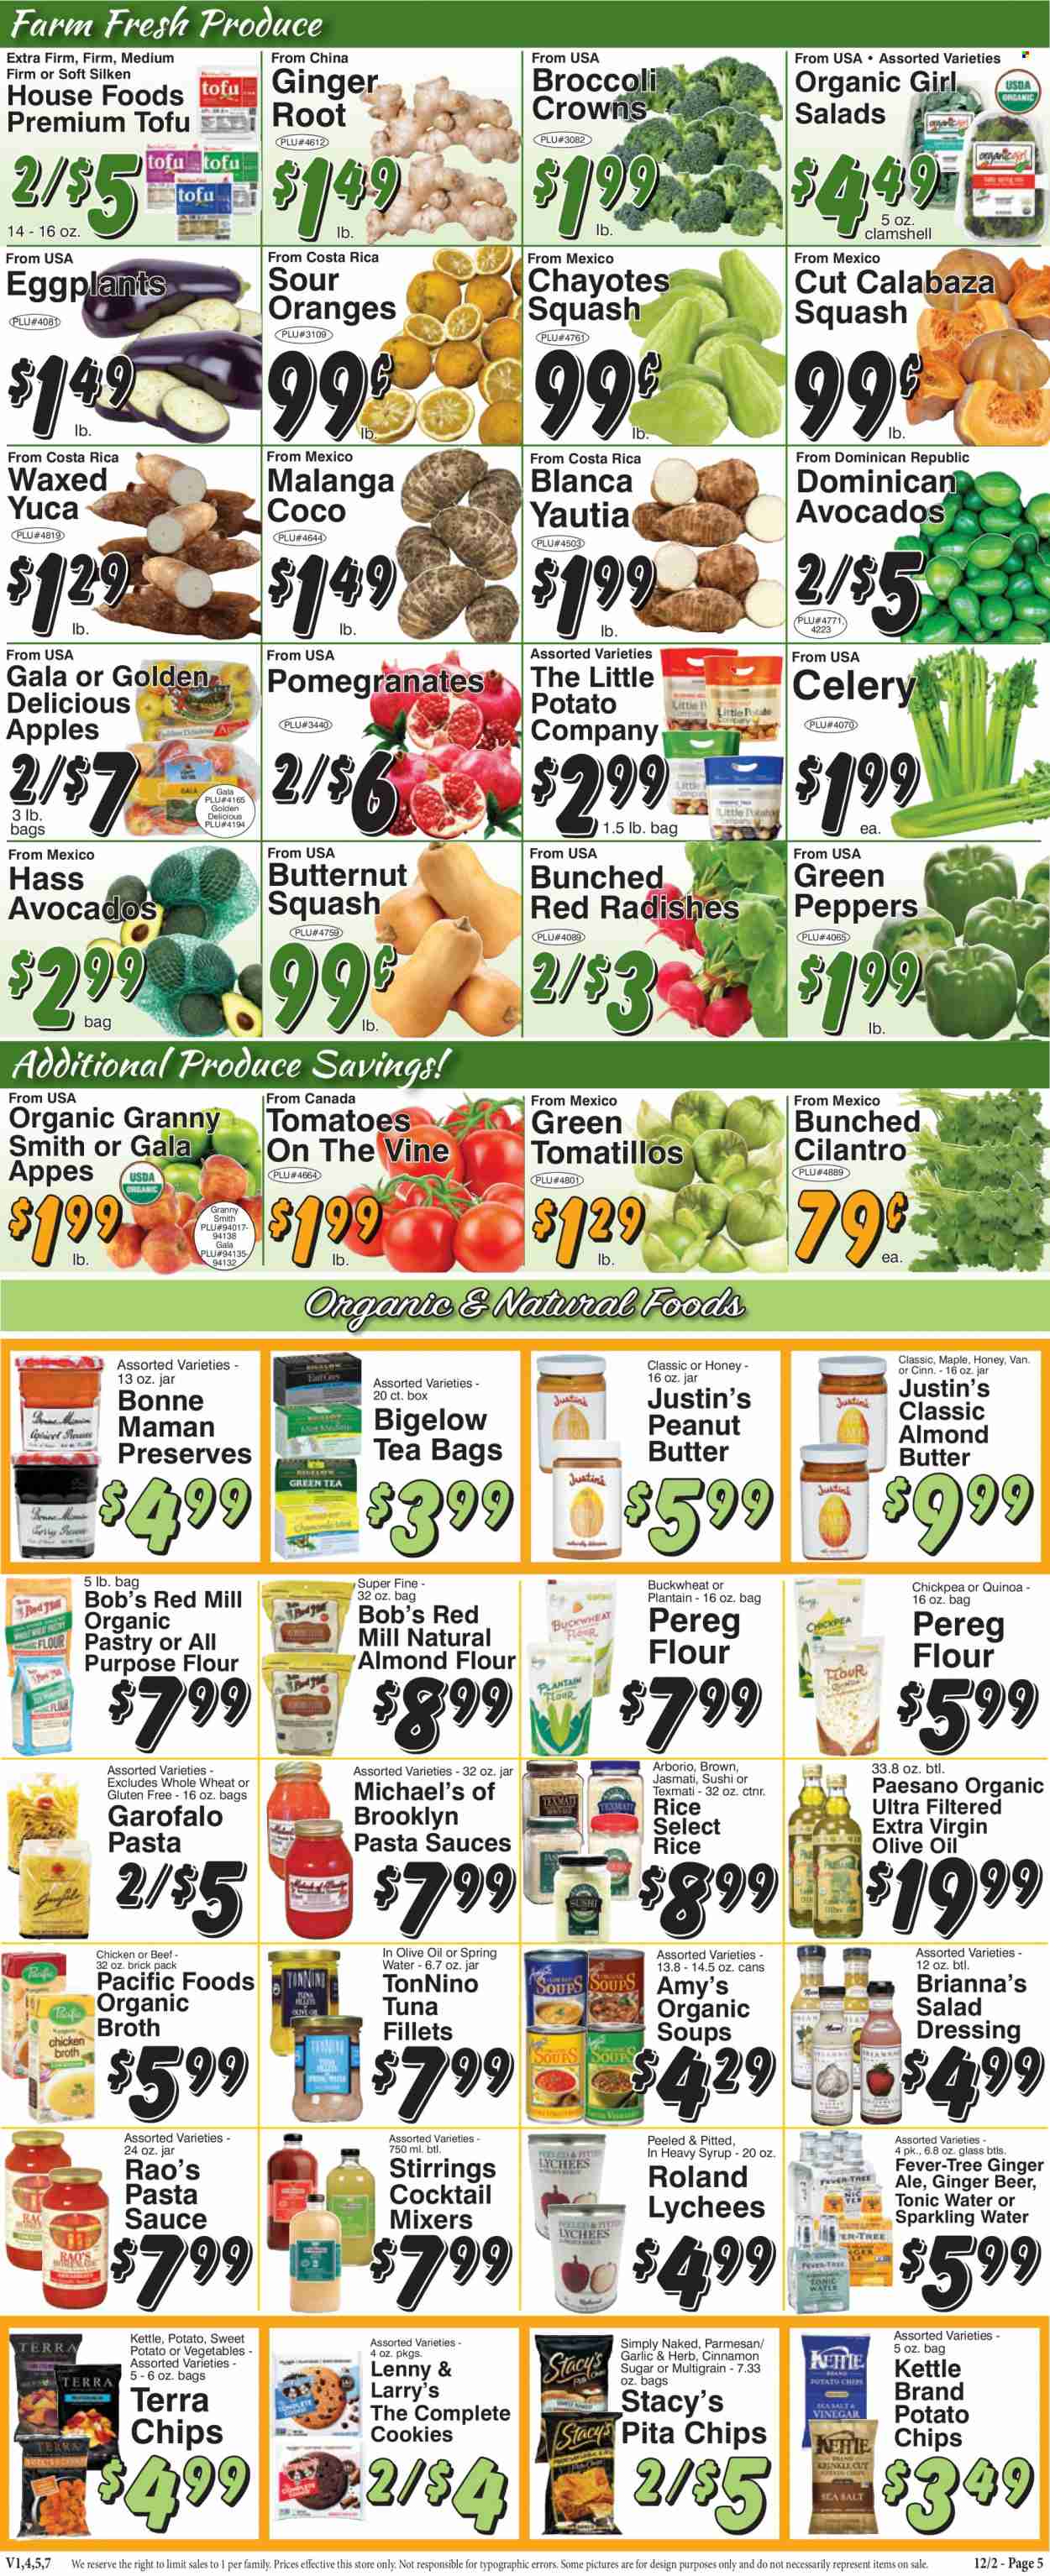 thumbnail - Trade Fair Supermarket Flyer - 12/02/2022 - 12/08/2022 - Sales products - celery, radishes, sweet potato, tomatillo, tomatoes, peppers, eggplant, avocado, Gala, oranges, Golden Delicious, chayote, Granny Smith, tuna, pasta sauce, tofu, almond butter, cookies, potato chips, chips, pita chips, all purpose flour, flour, sugar, broth, almond flour, buckwheat, quinoa, rice, cilantro, cinnamon, salad dressing, dressing, extra virgin olive oil, peanut butter, syrup, ginger ale, tonic, spring water, sparkling water, tea bags, beer, butternut squash, ginger beer, pomegranate. Page 5.